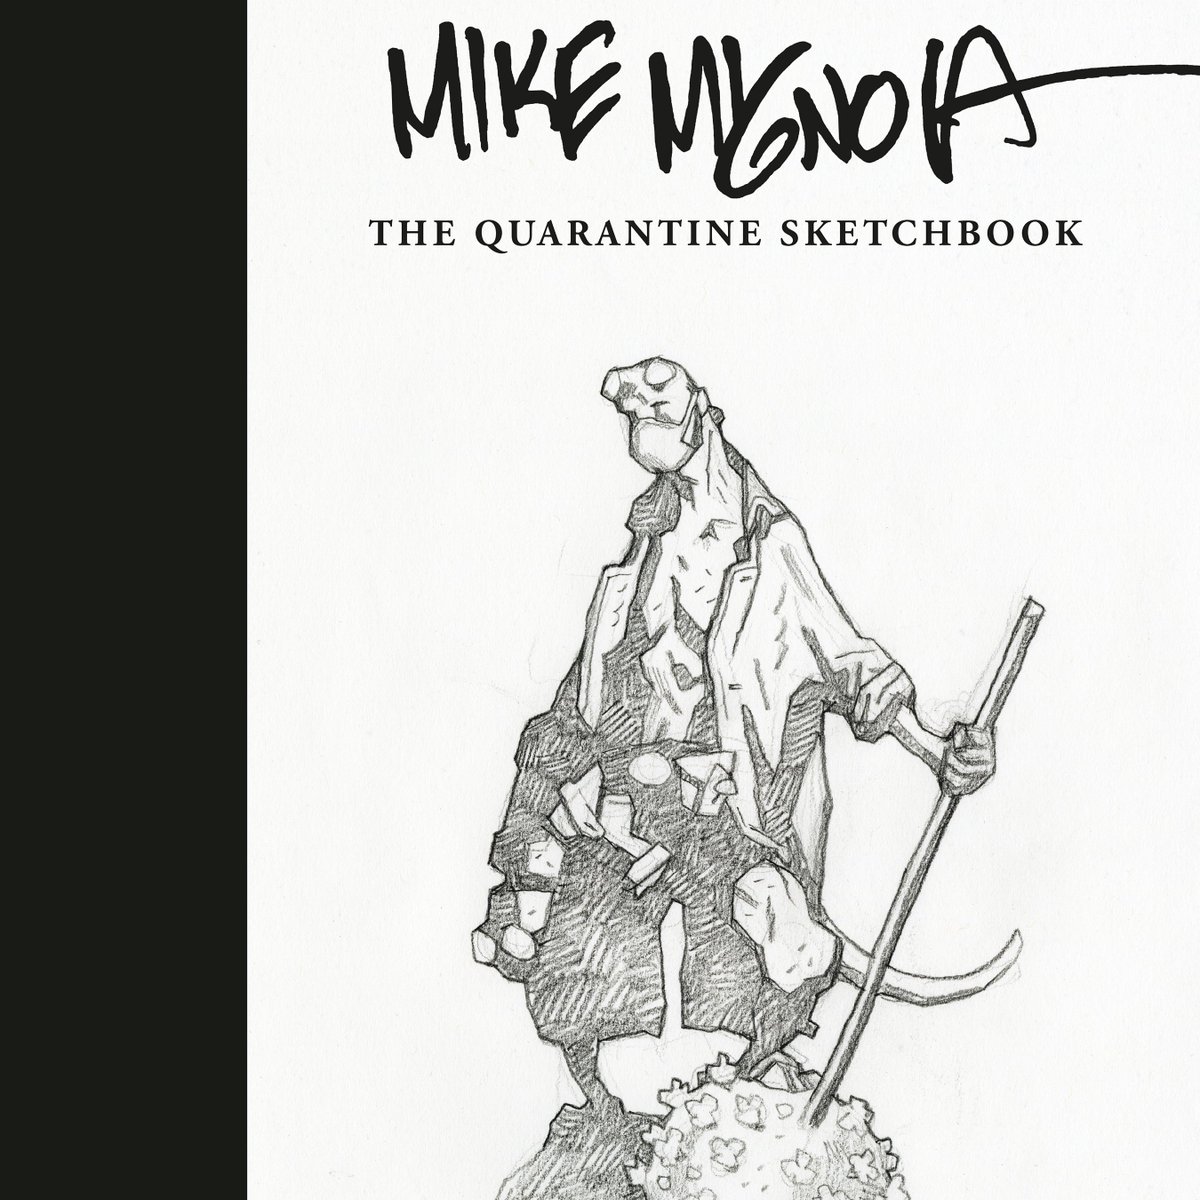 .@IGN has the details about the MIKE MIGNOLA: THE QUARANTINE SKETCHBOOK hardcover from @DarkHorseComics. All profits go to @chefjoseandres' @WCKitchen.
https://t.co/kaSt2ABJDa 